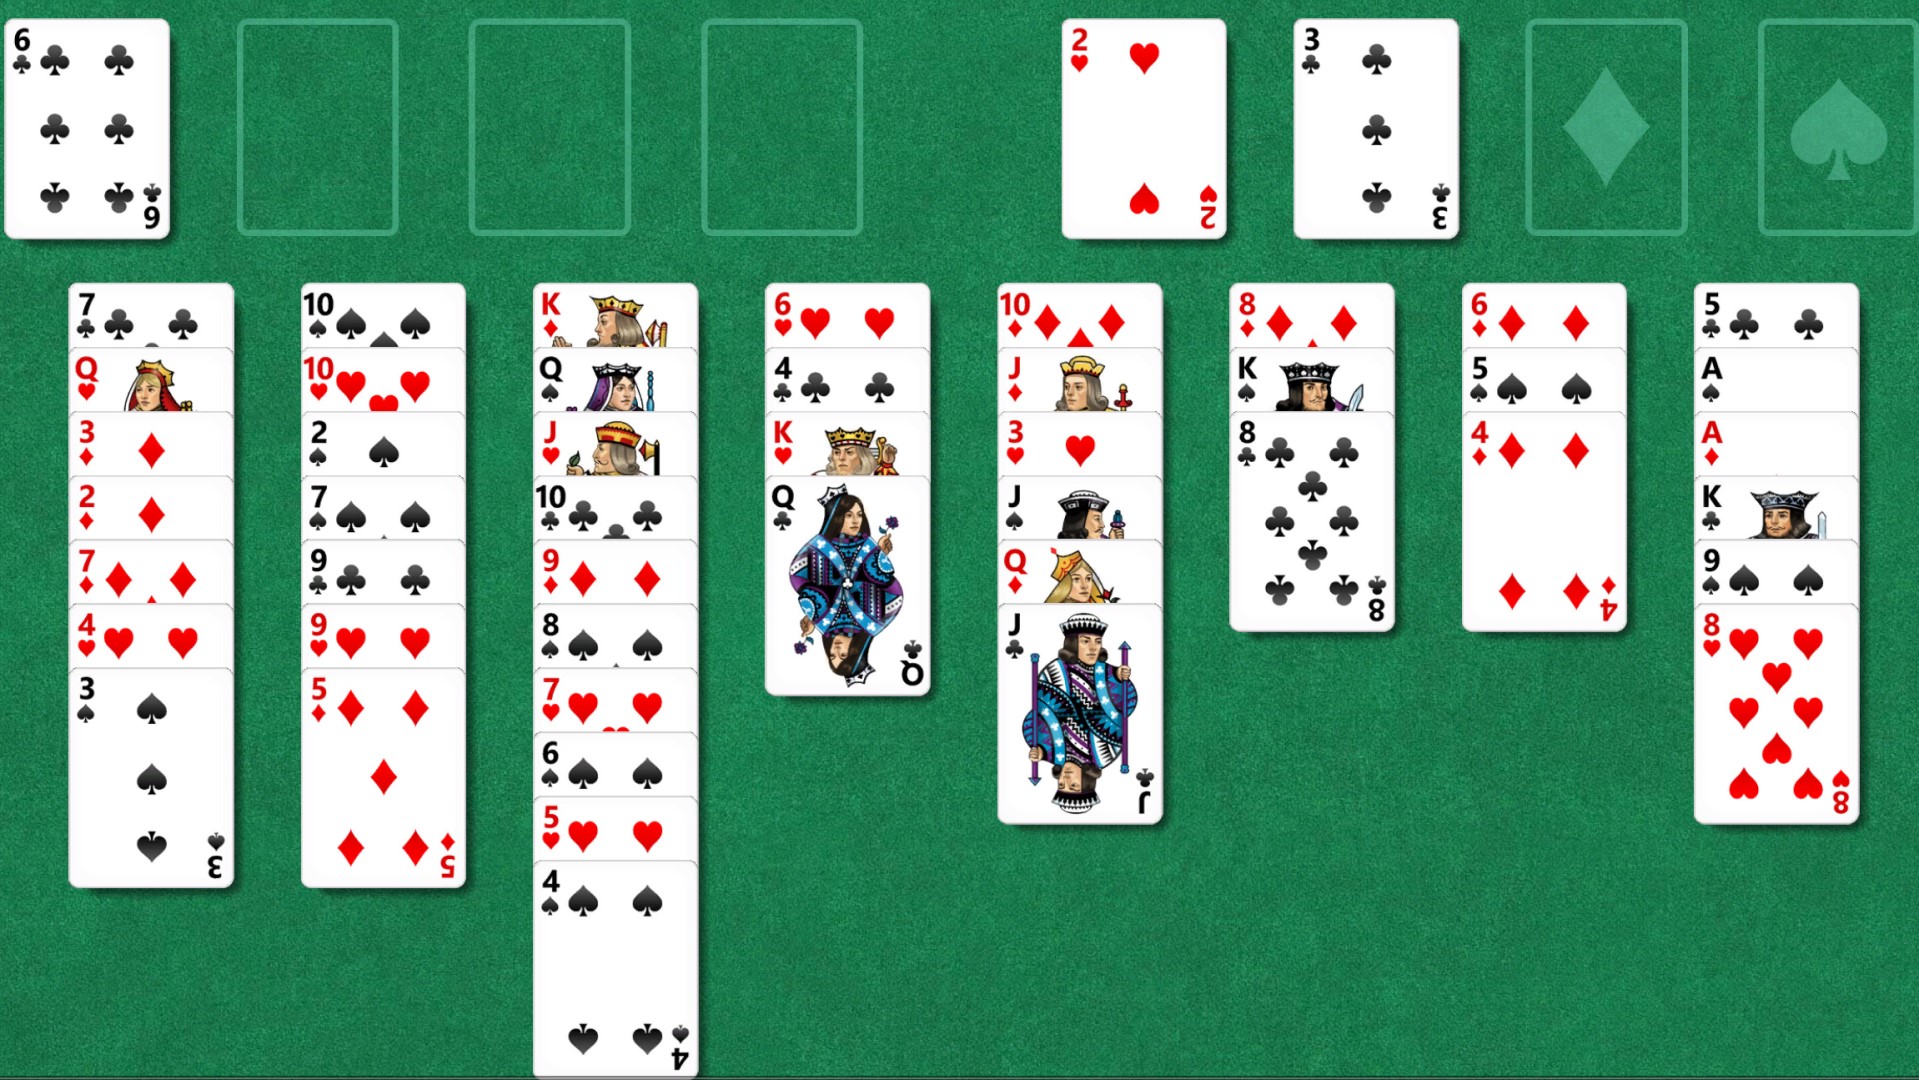 Finally, Solitaire is coming to Game Pass